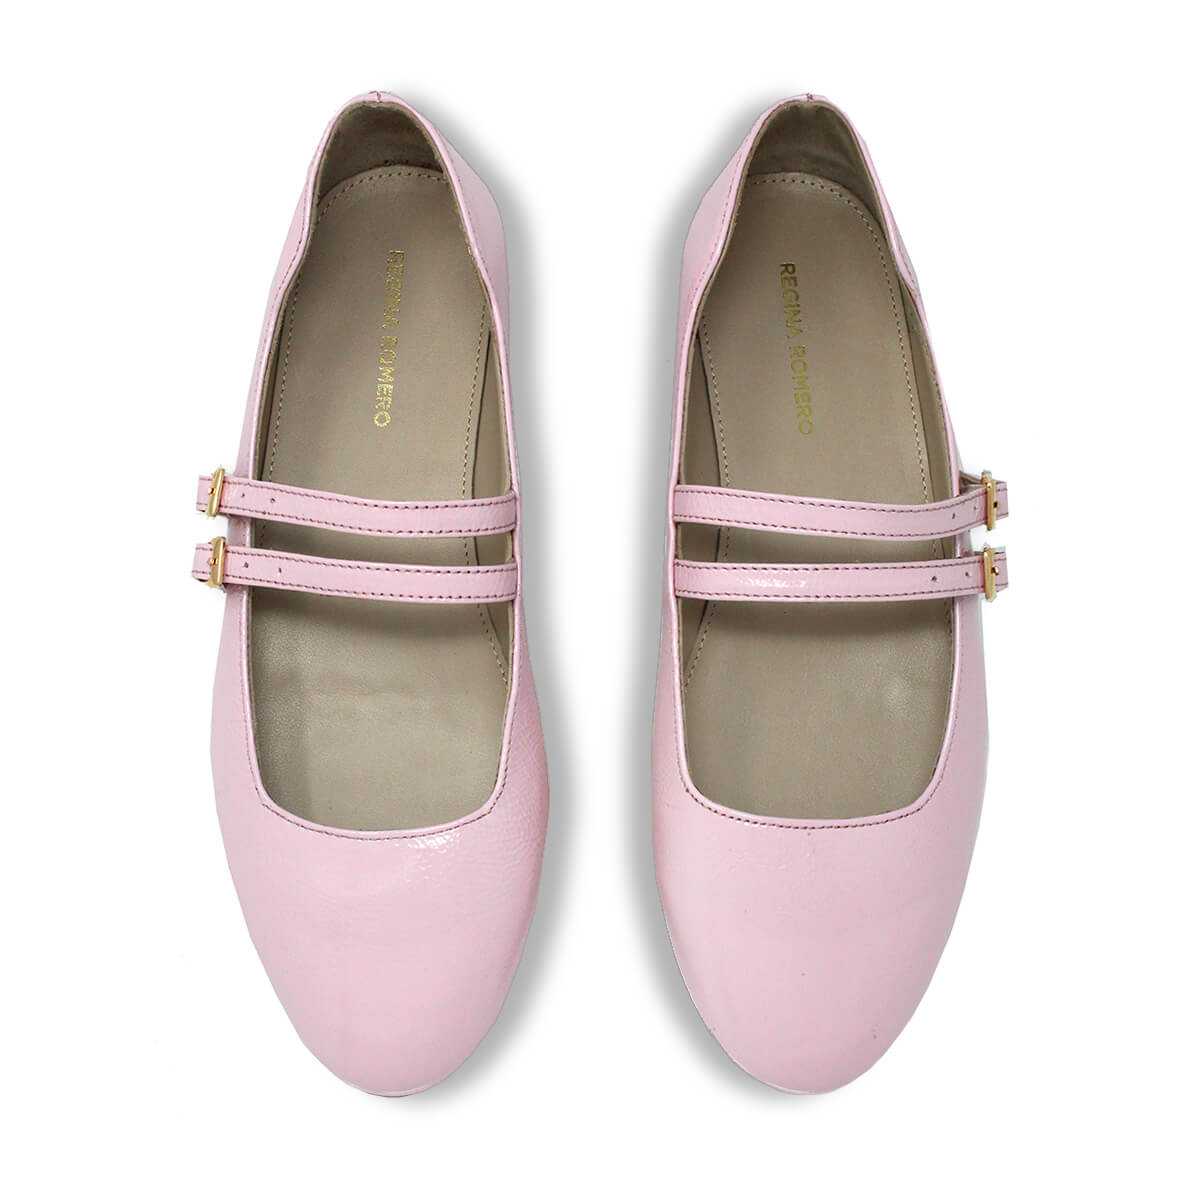 VIOLET - Pink Patent Leather Regina Romero Flat Ballerina Shoe for Women in Leather